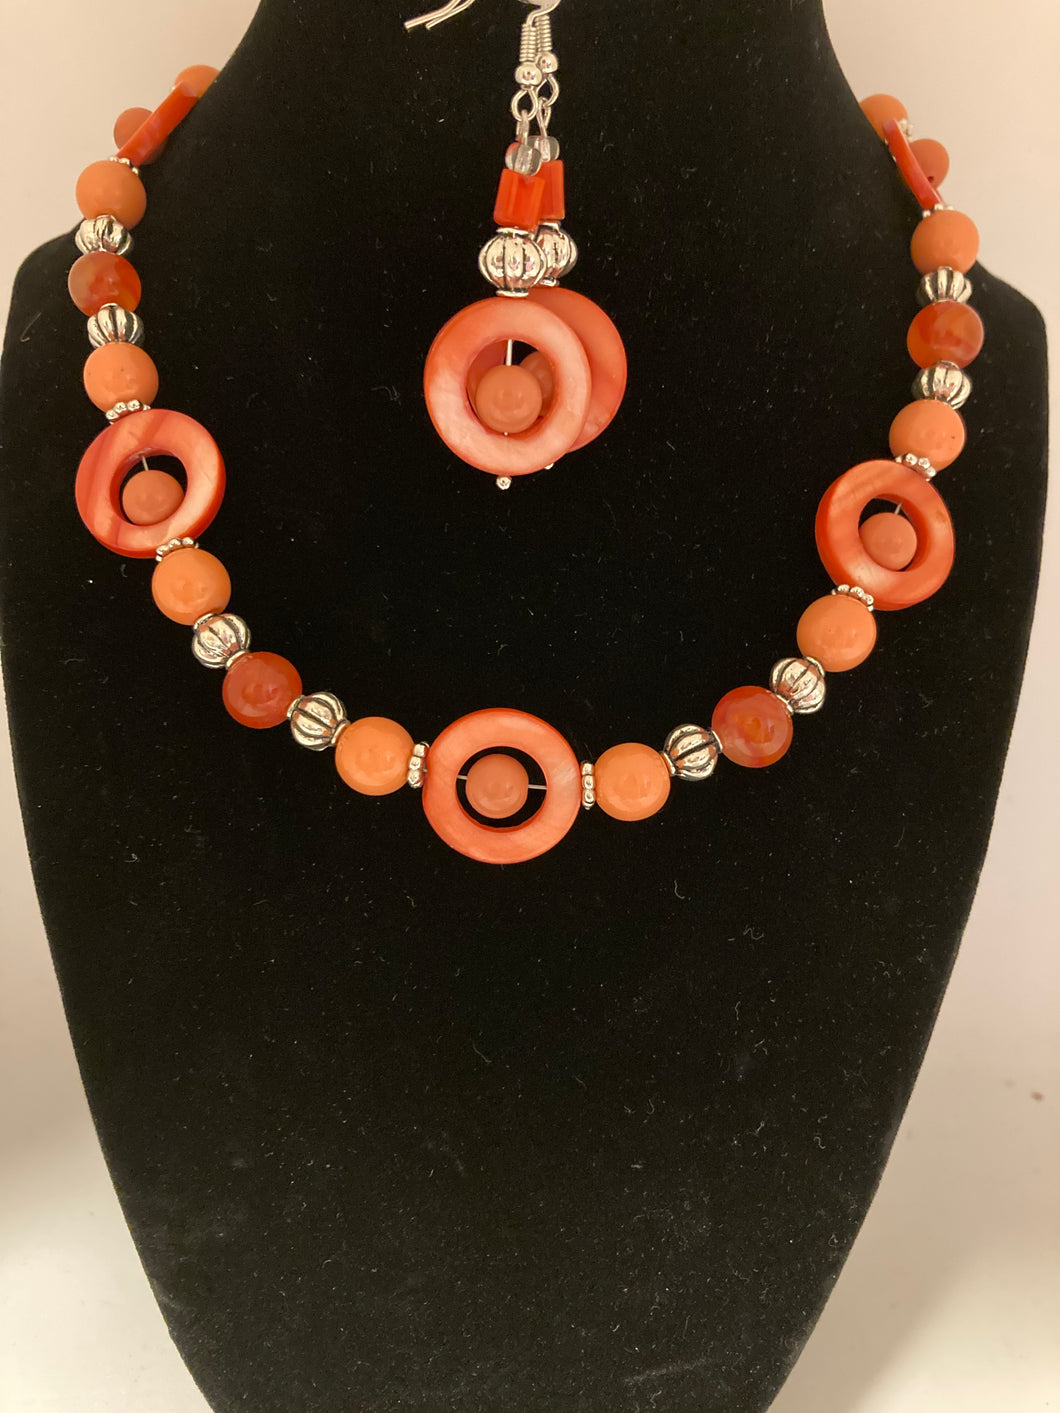 Coral necklace and earring set with assorted novelty beads